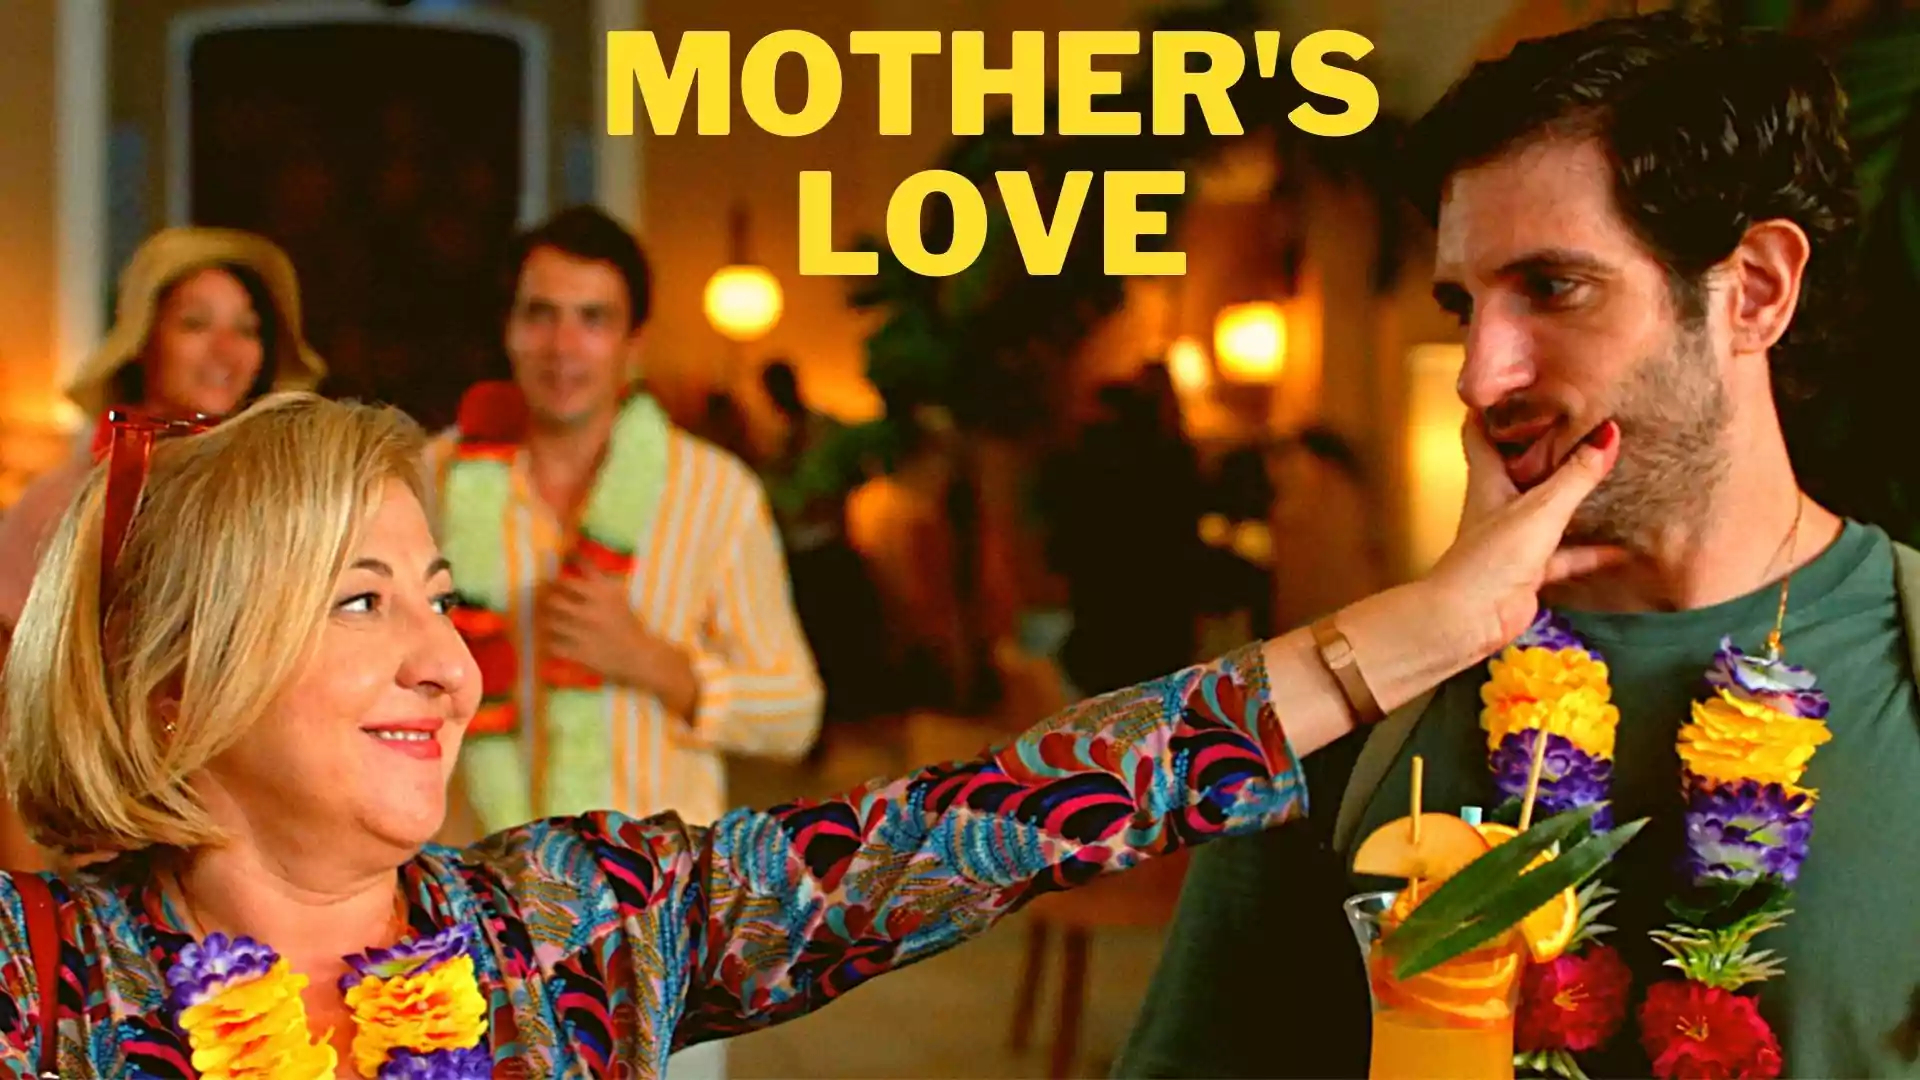 Mother's Love Wallpaper and Image